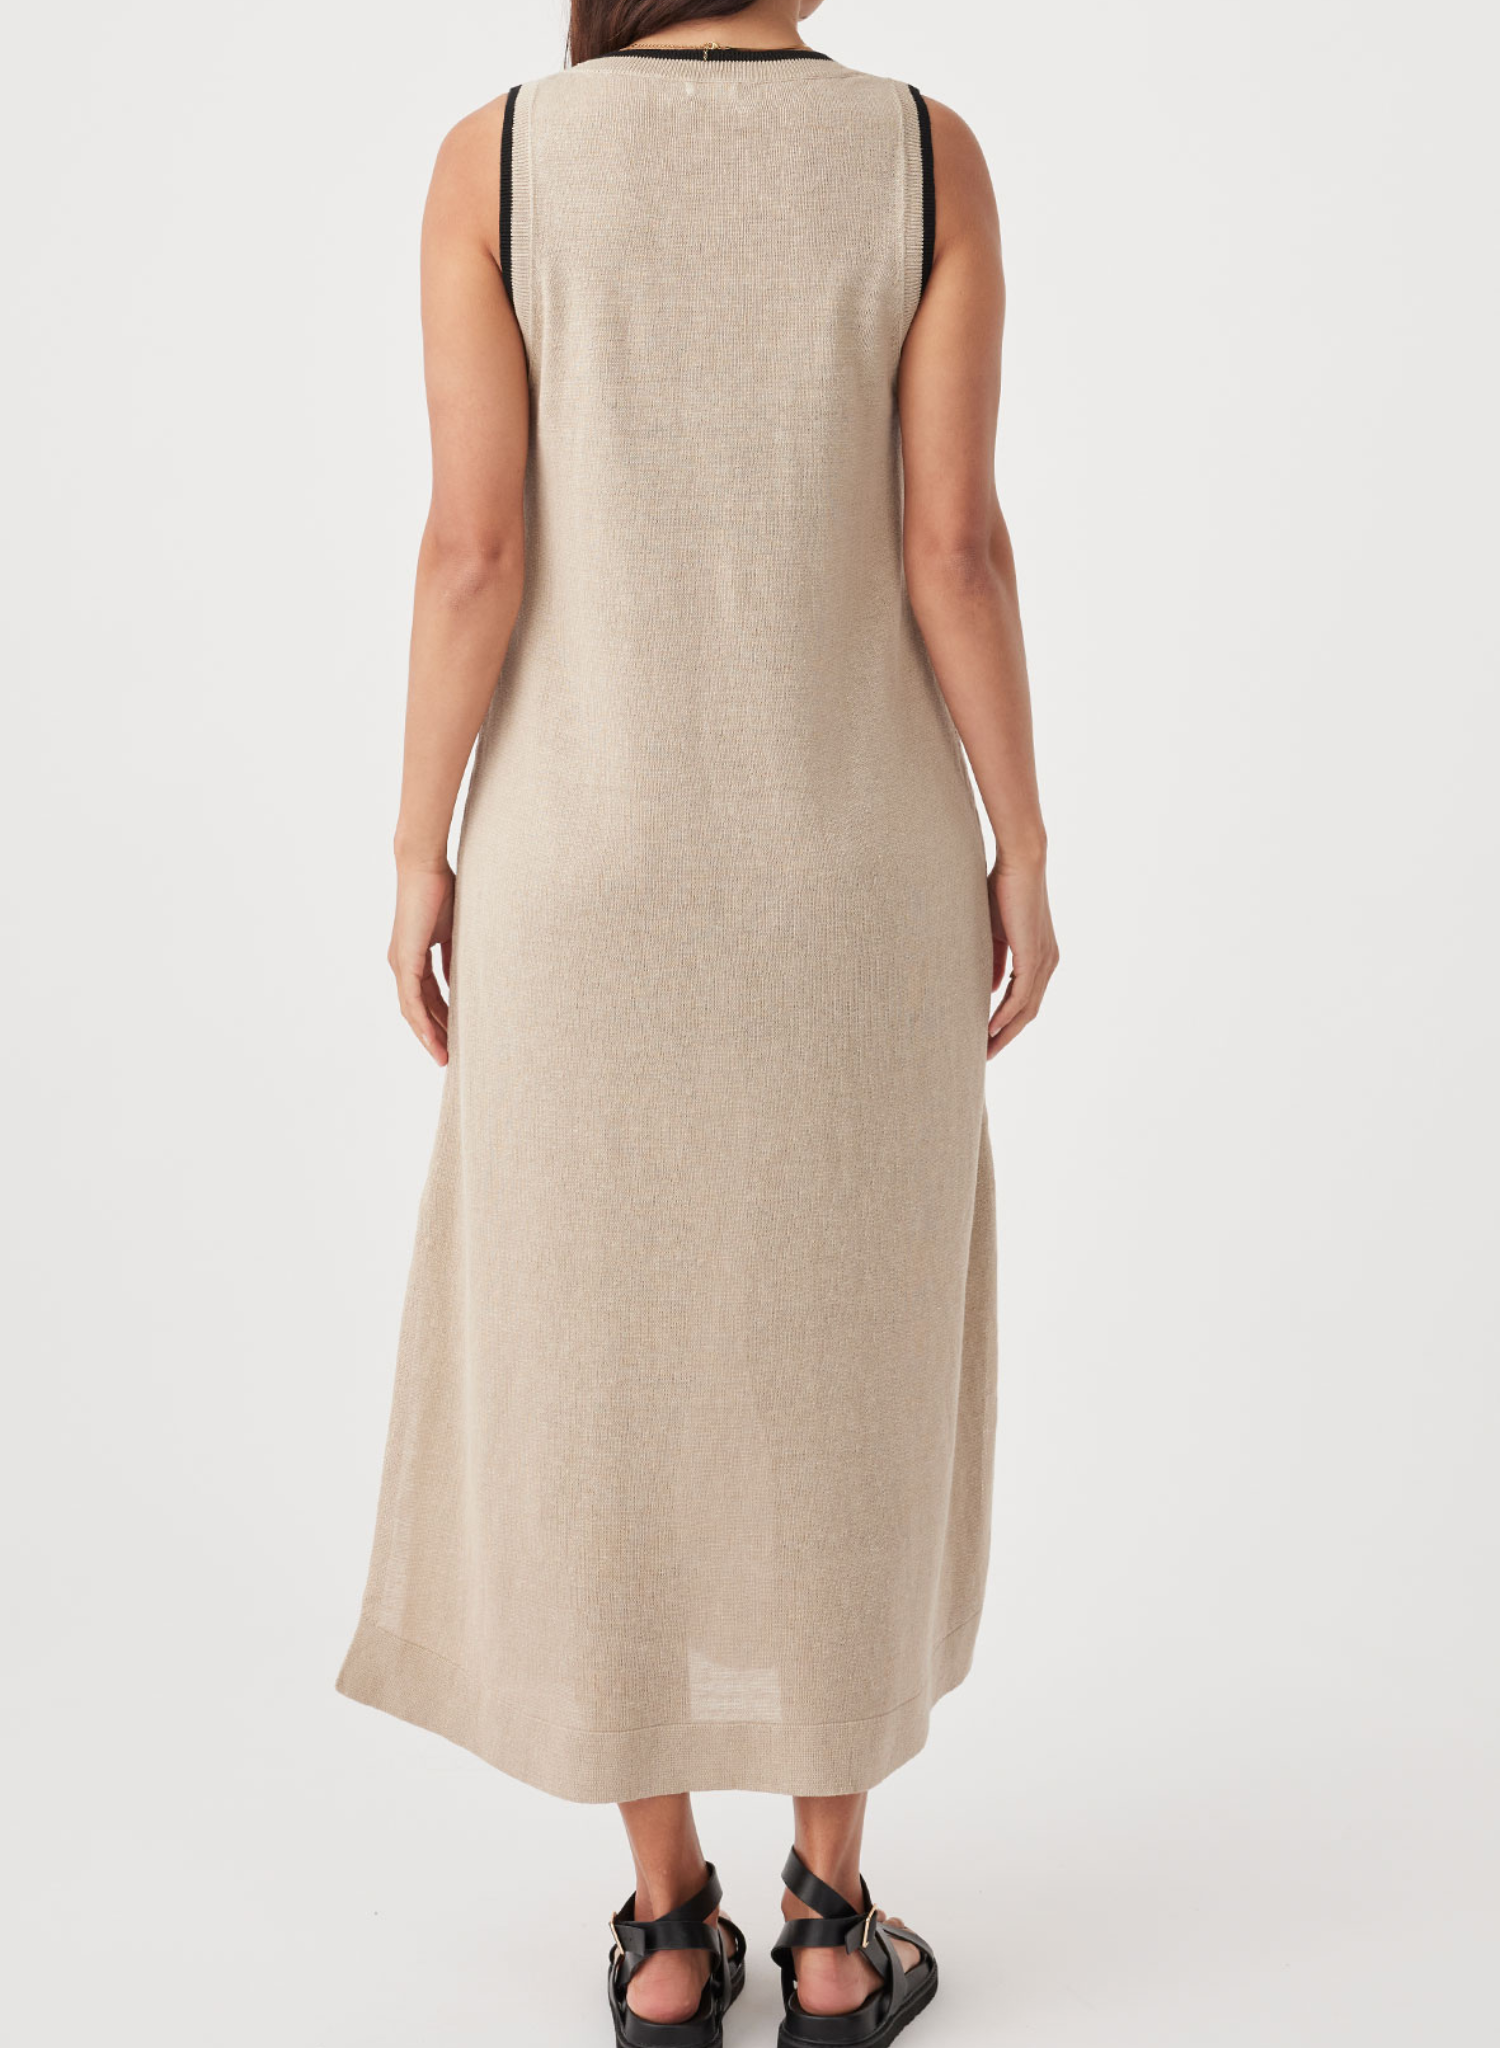 Brie Long Dress in Taupe